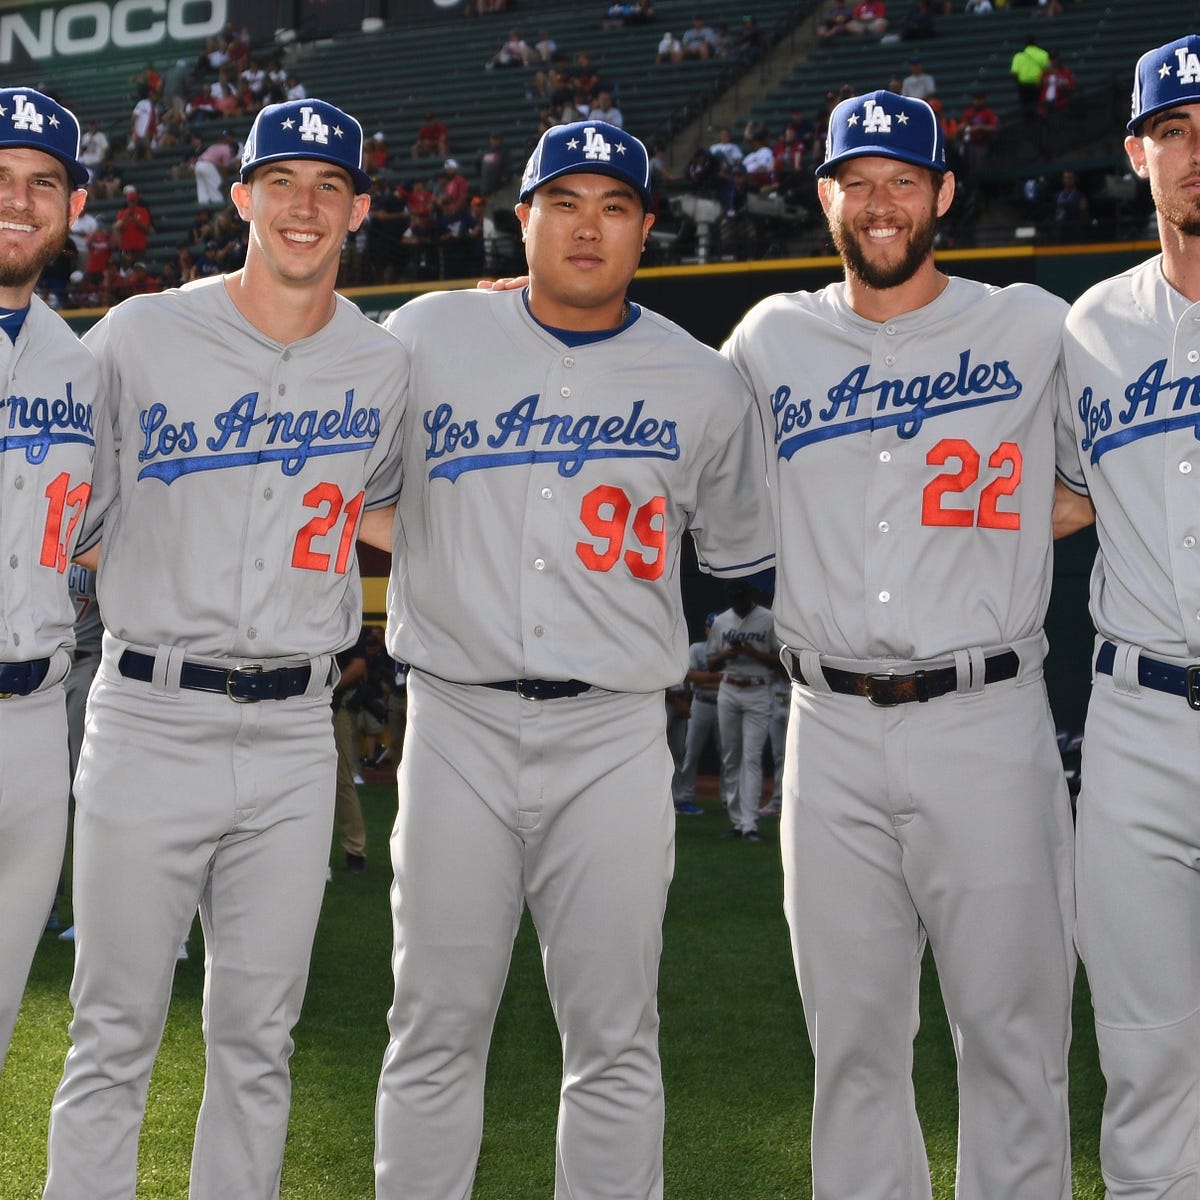 Photos: Dodgers' five All-Stars play in 2019 All-Star Game | by Rowan  Kavner | Dodger Insider